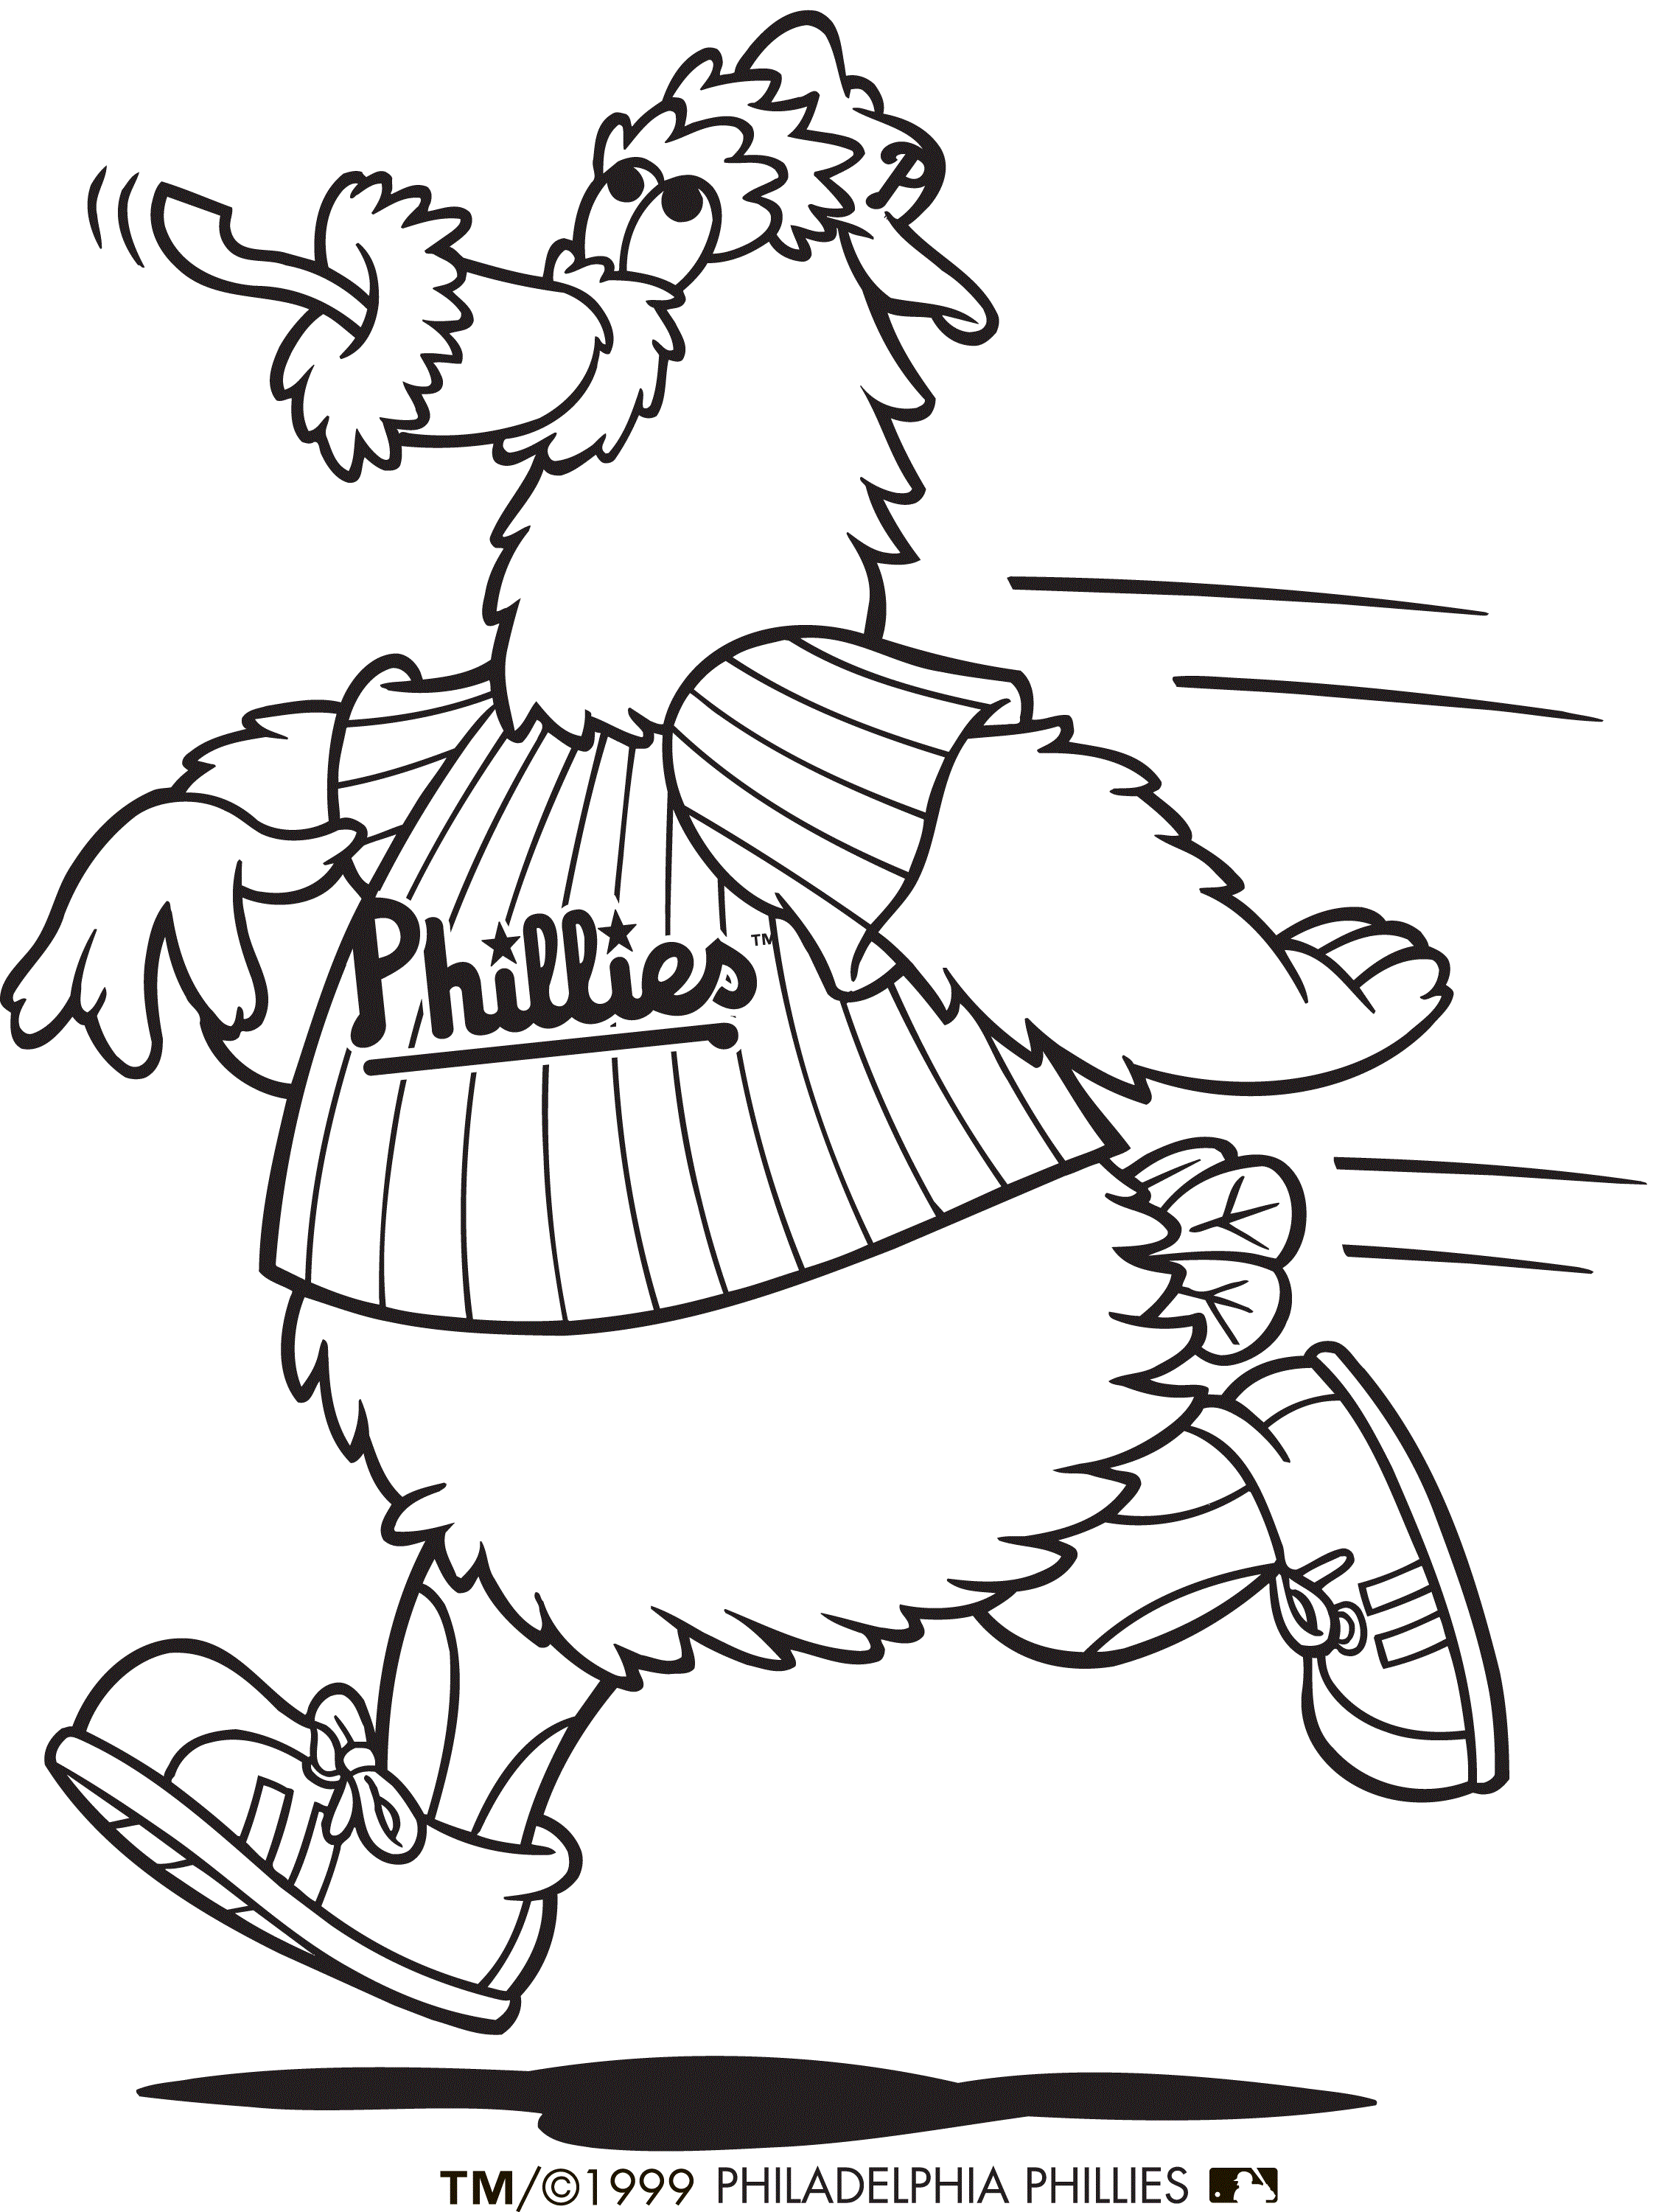 philadelphia phillies mascot coloring pages